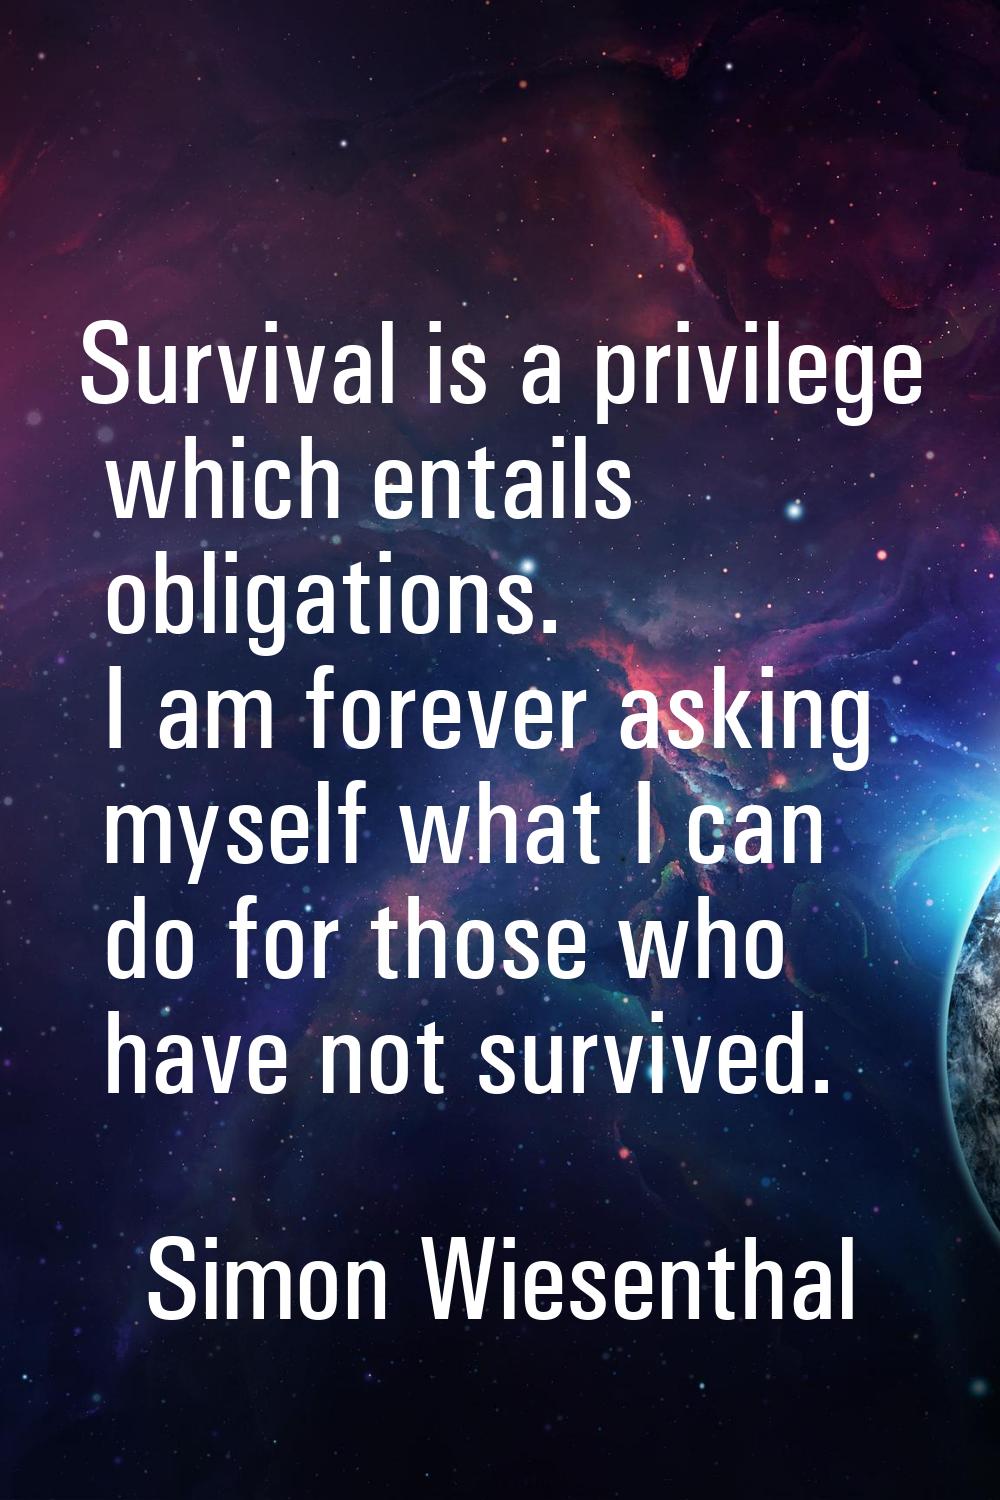 Survival is a privilege which entails obligations. I am forever asking myself what I can do for tho